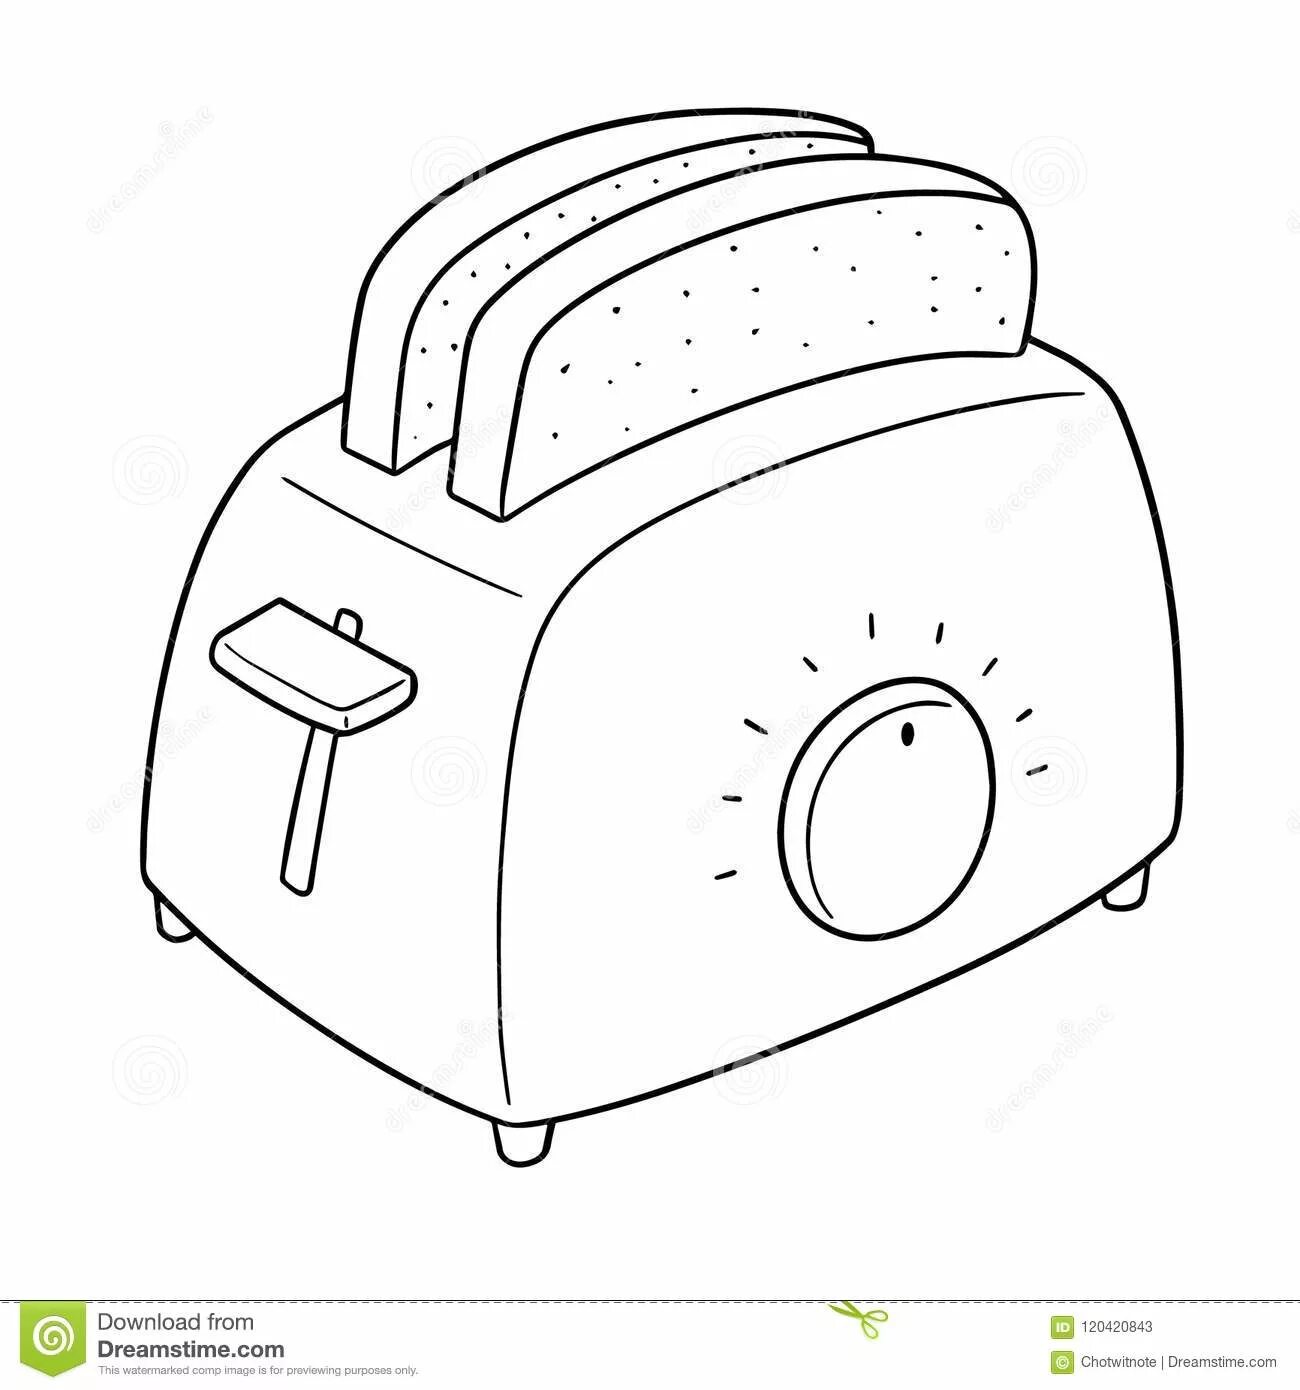 Sweet toaster coloring page